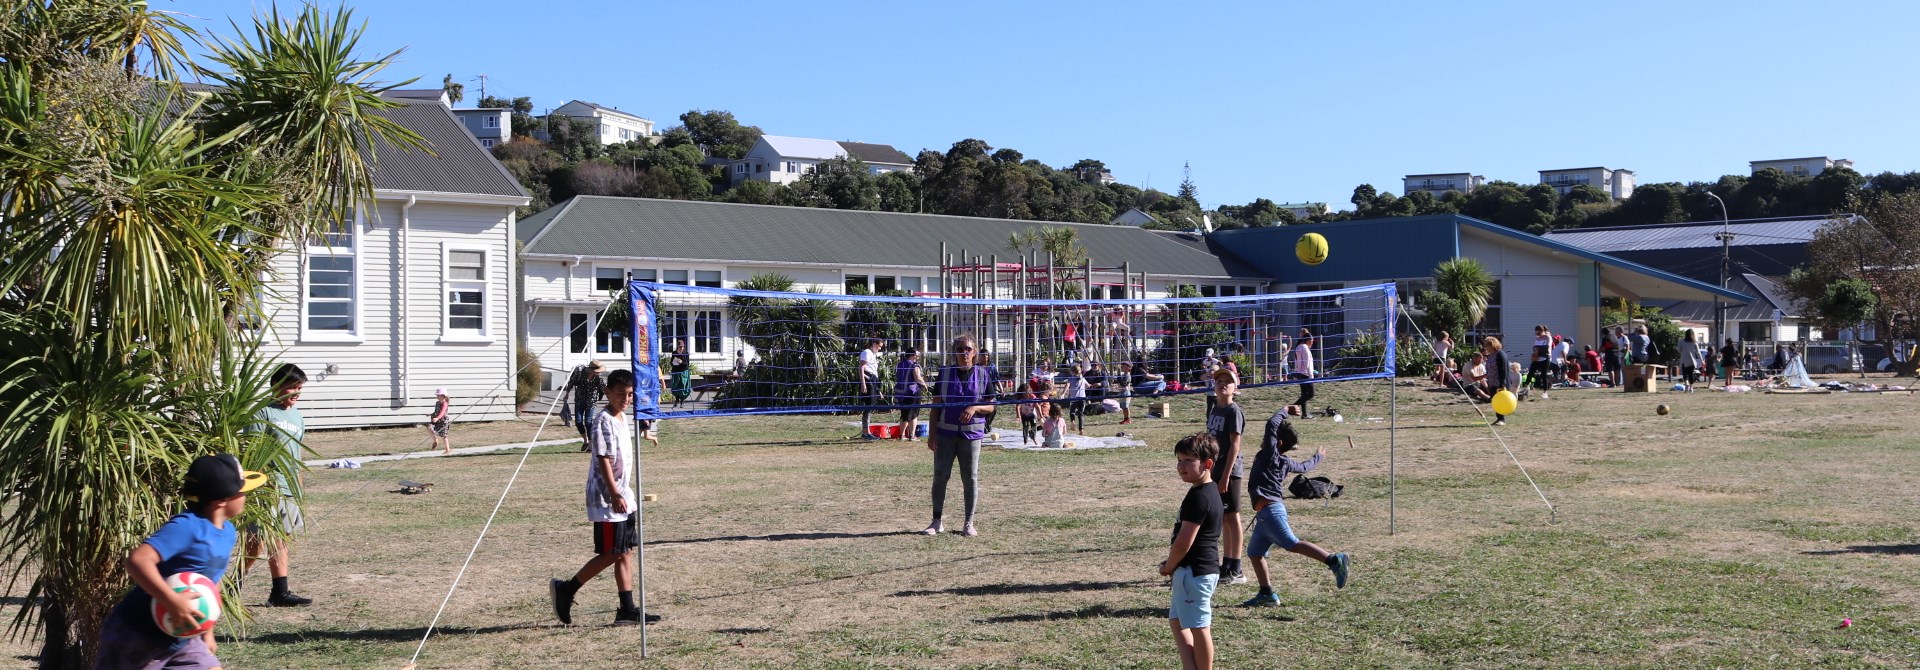 Children playing on the field with a volleyball net and classrooms in the background at Kahurangi School in Strathmore.